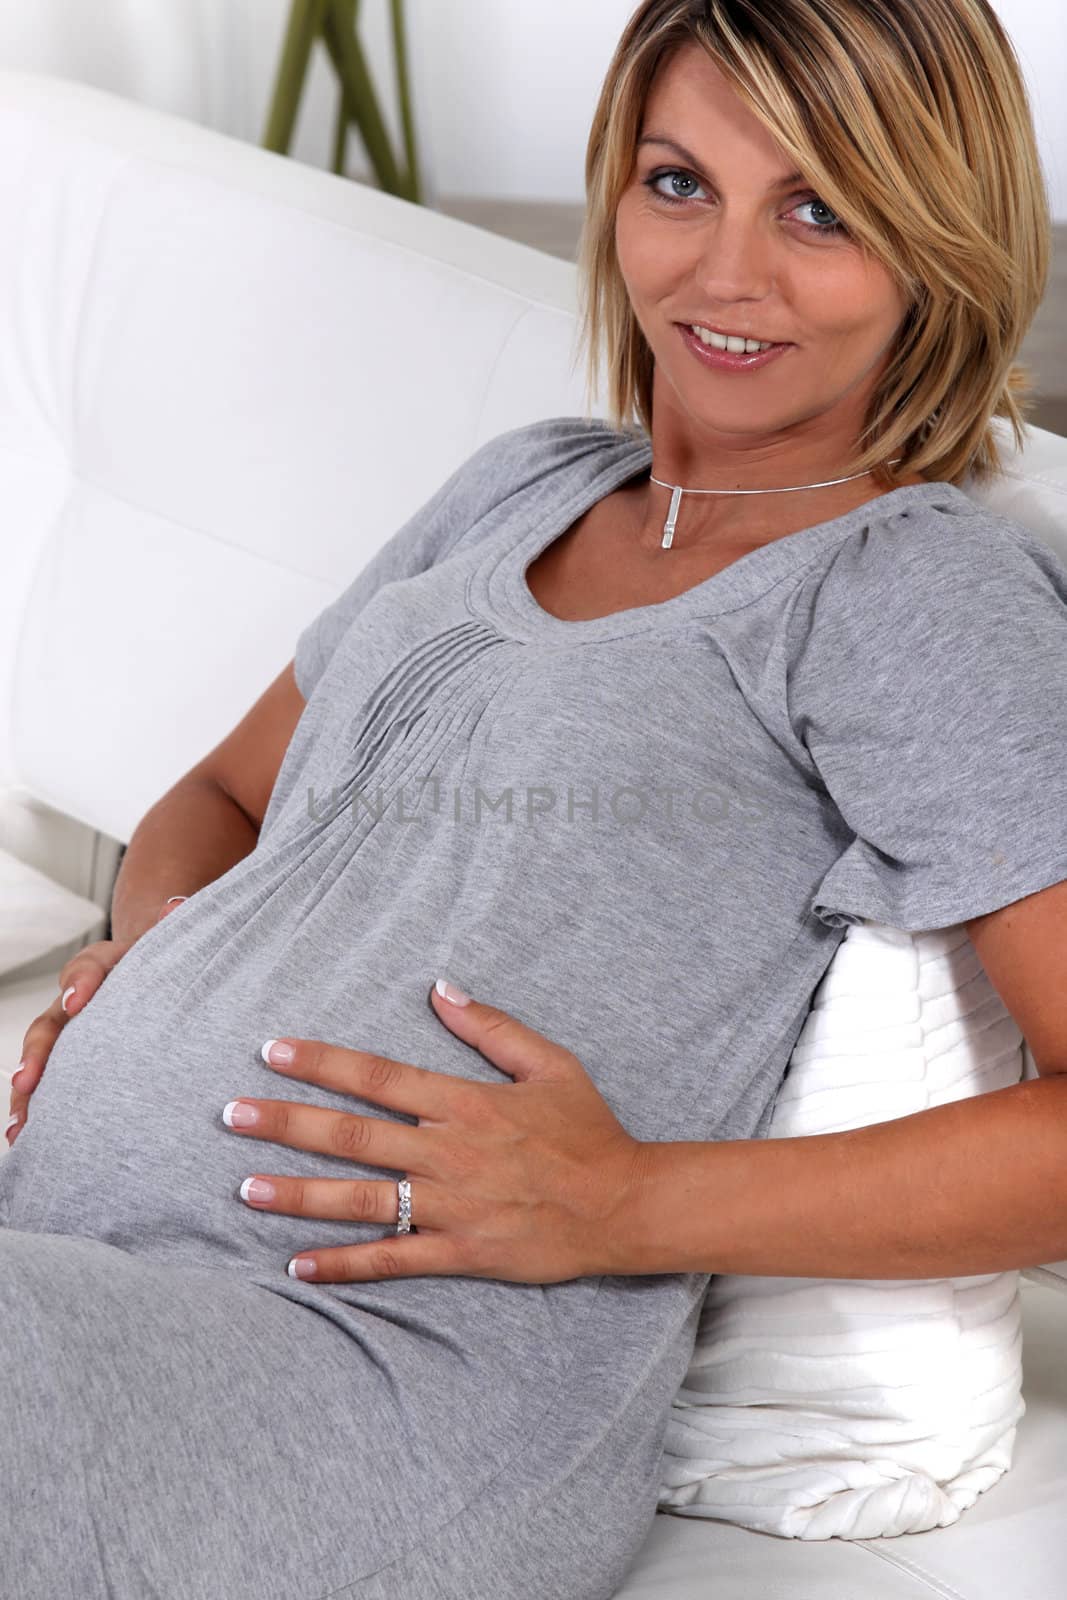 a pregnant woman touching her stomach by phovoir